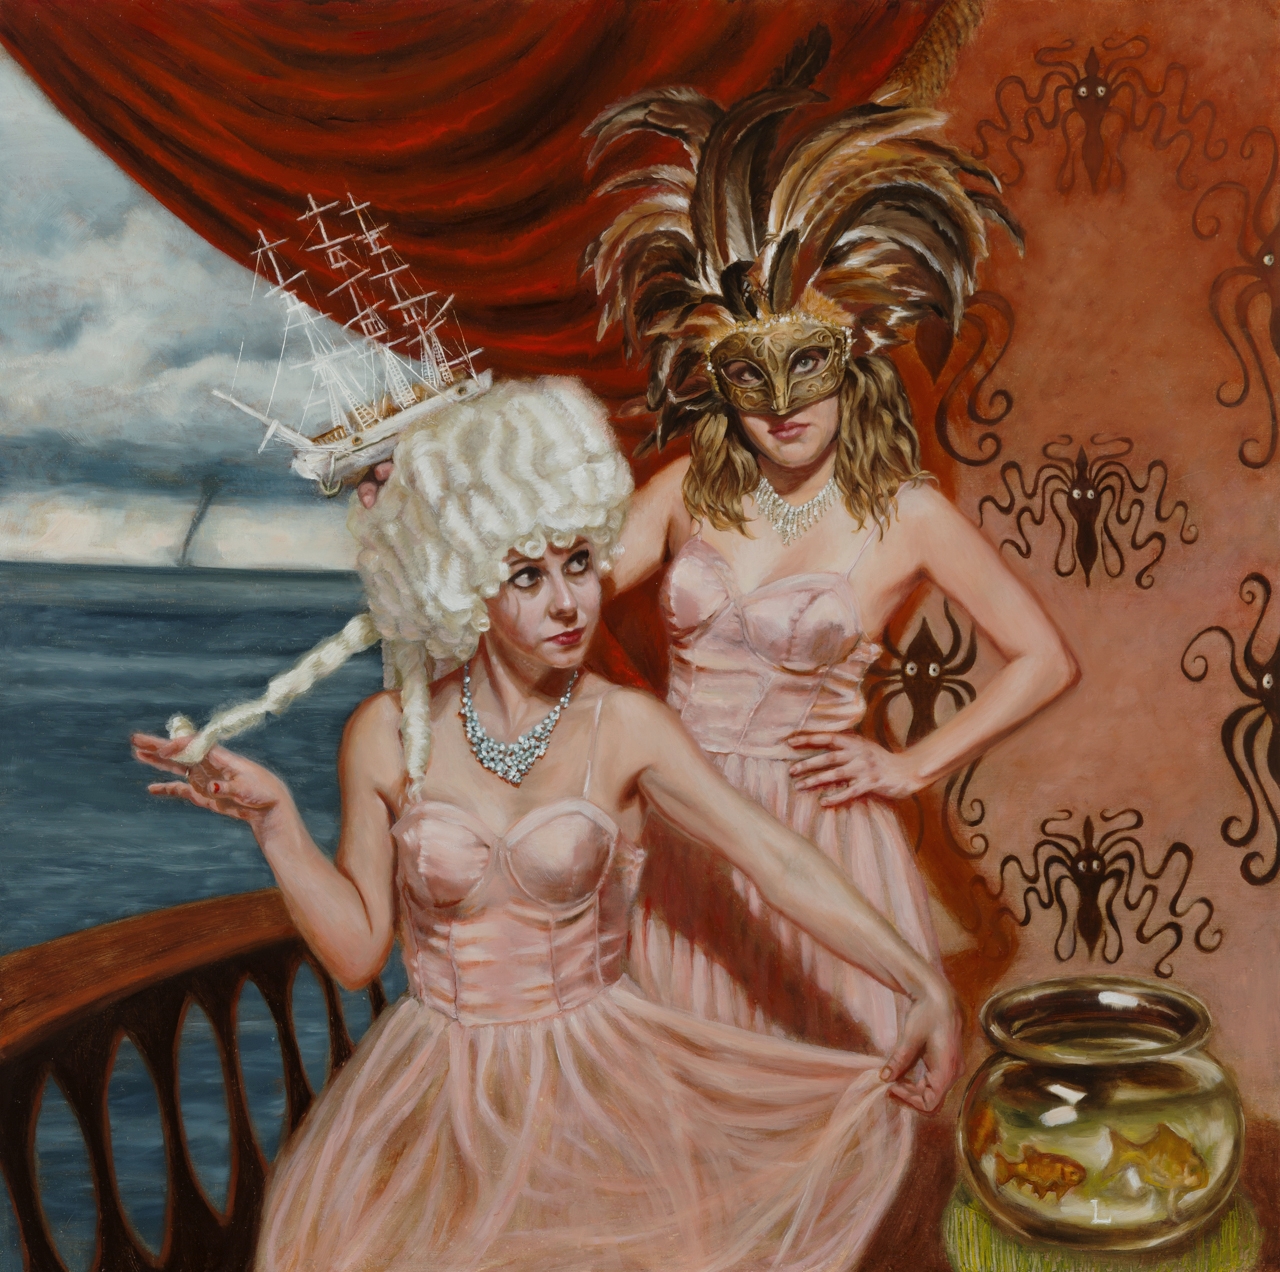    &nbsp;Vardøger    Oil on Aluminum panel. 26”x26” with black wood frame - 2016  A very delightful scene unfolds here; We find two ladies in matching pink satin and tulle ballerina dresses. The feathered mask lady rests a white schooner atop the Mar